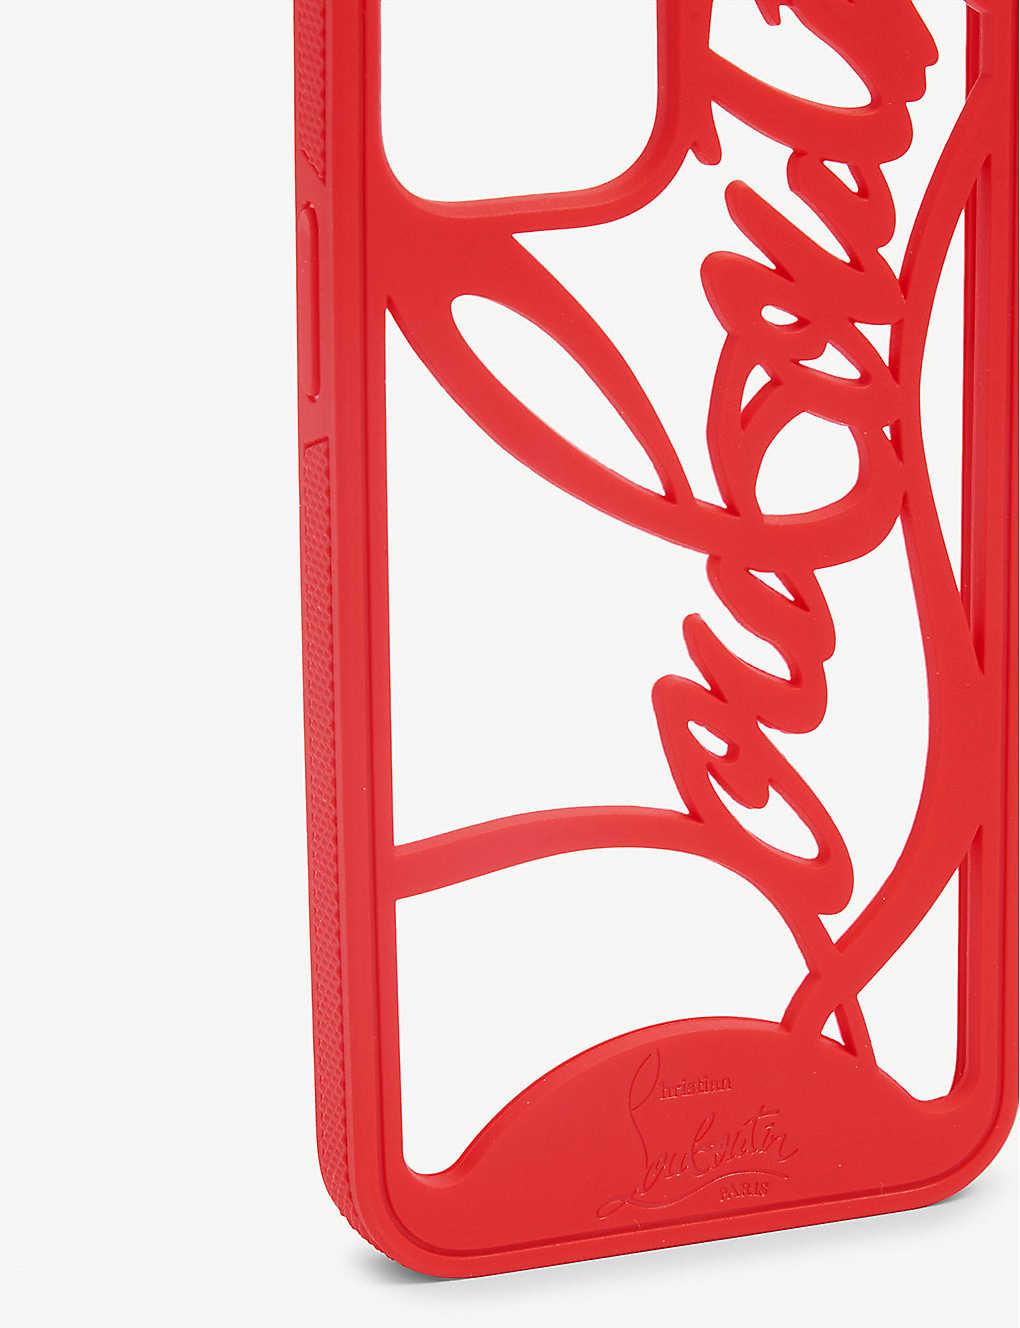 Christian Louboutin Cell Phone & Accessory Cases